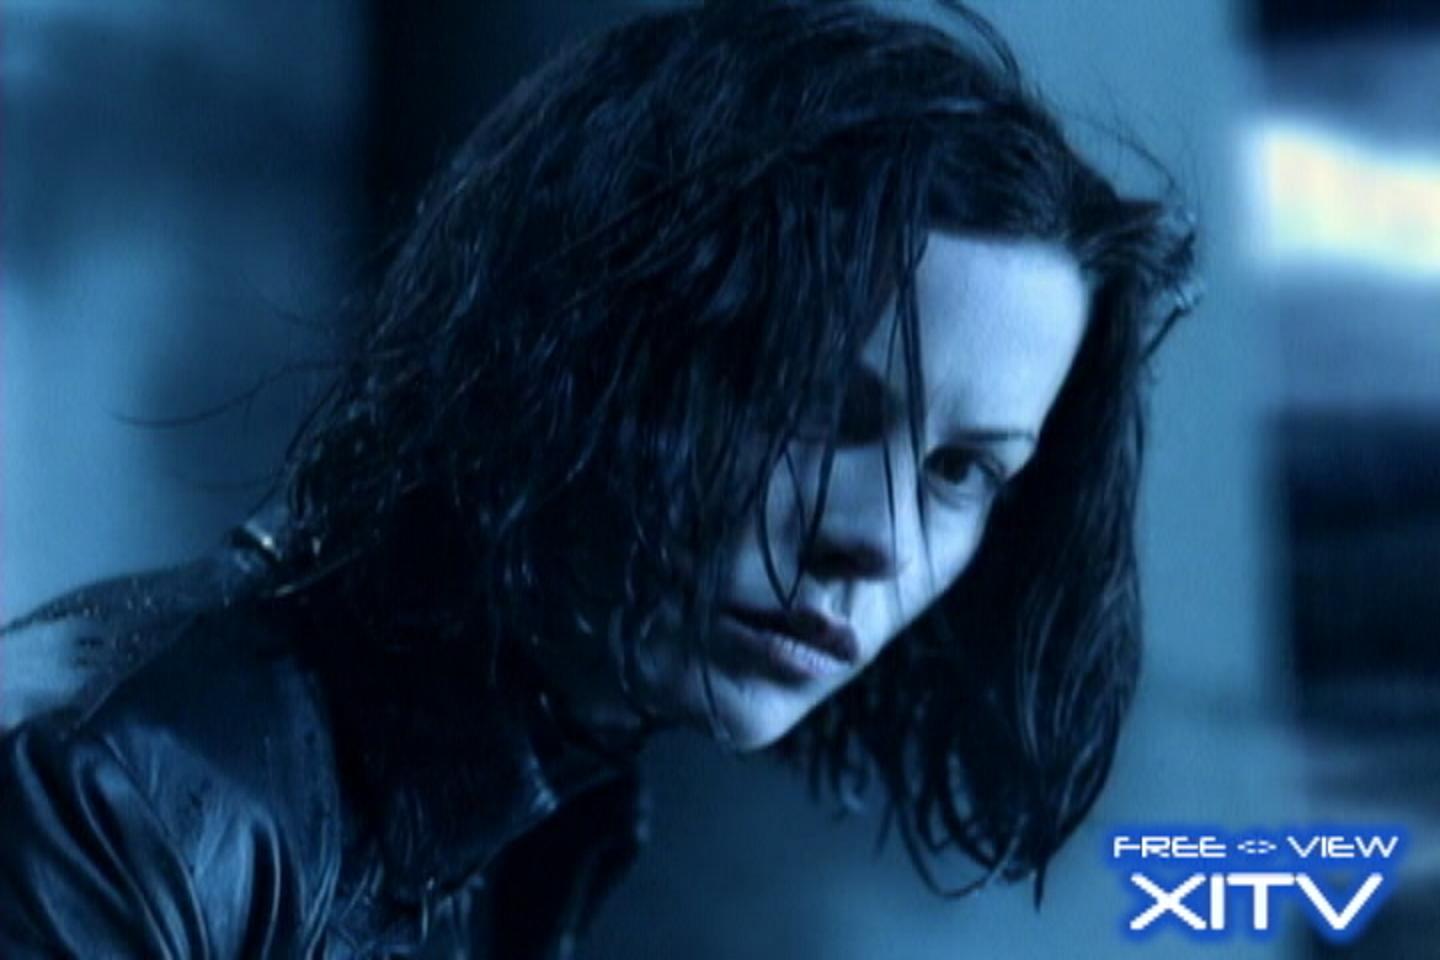 Free Movies Show List #2 Featuring UNDERWORLD Starring Kate Beckinsale! Watch Many More Great Films On XITV FREE <> VIEW™